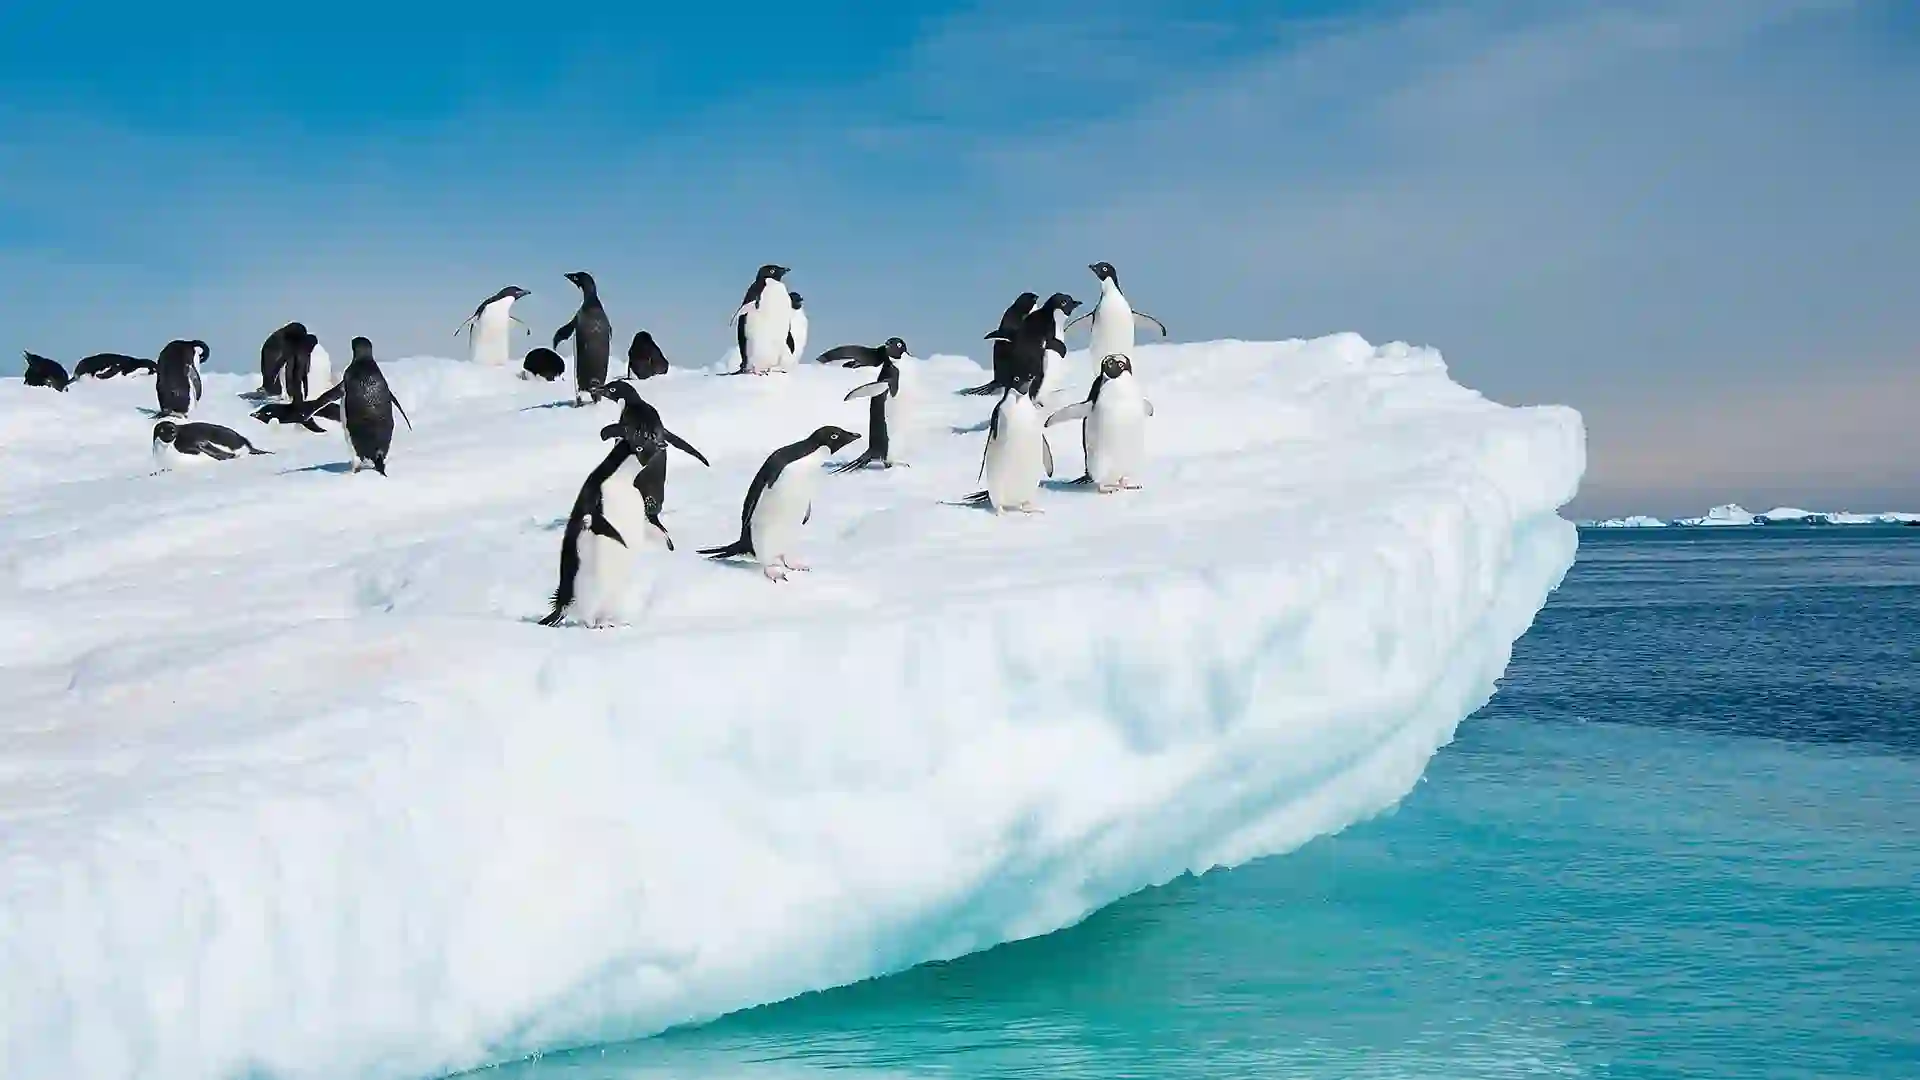 View of black and white penguins on floating ice surrounded by icy-blue waters.